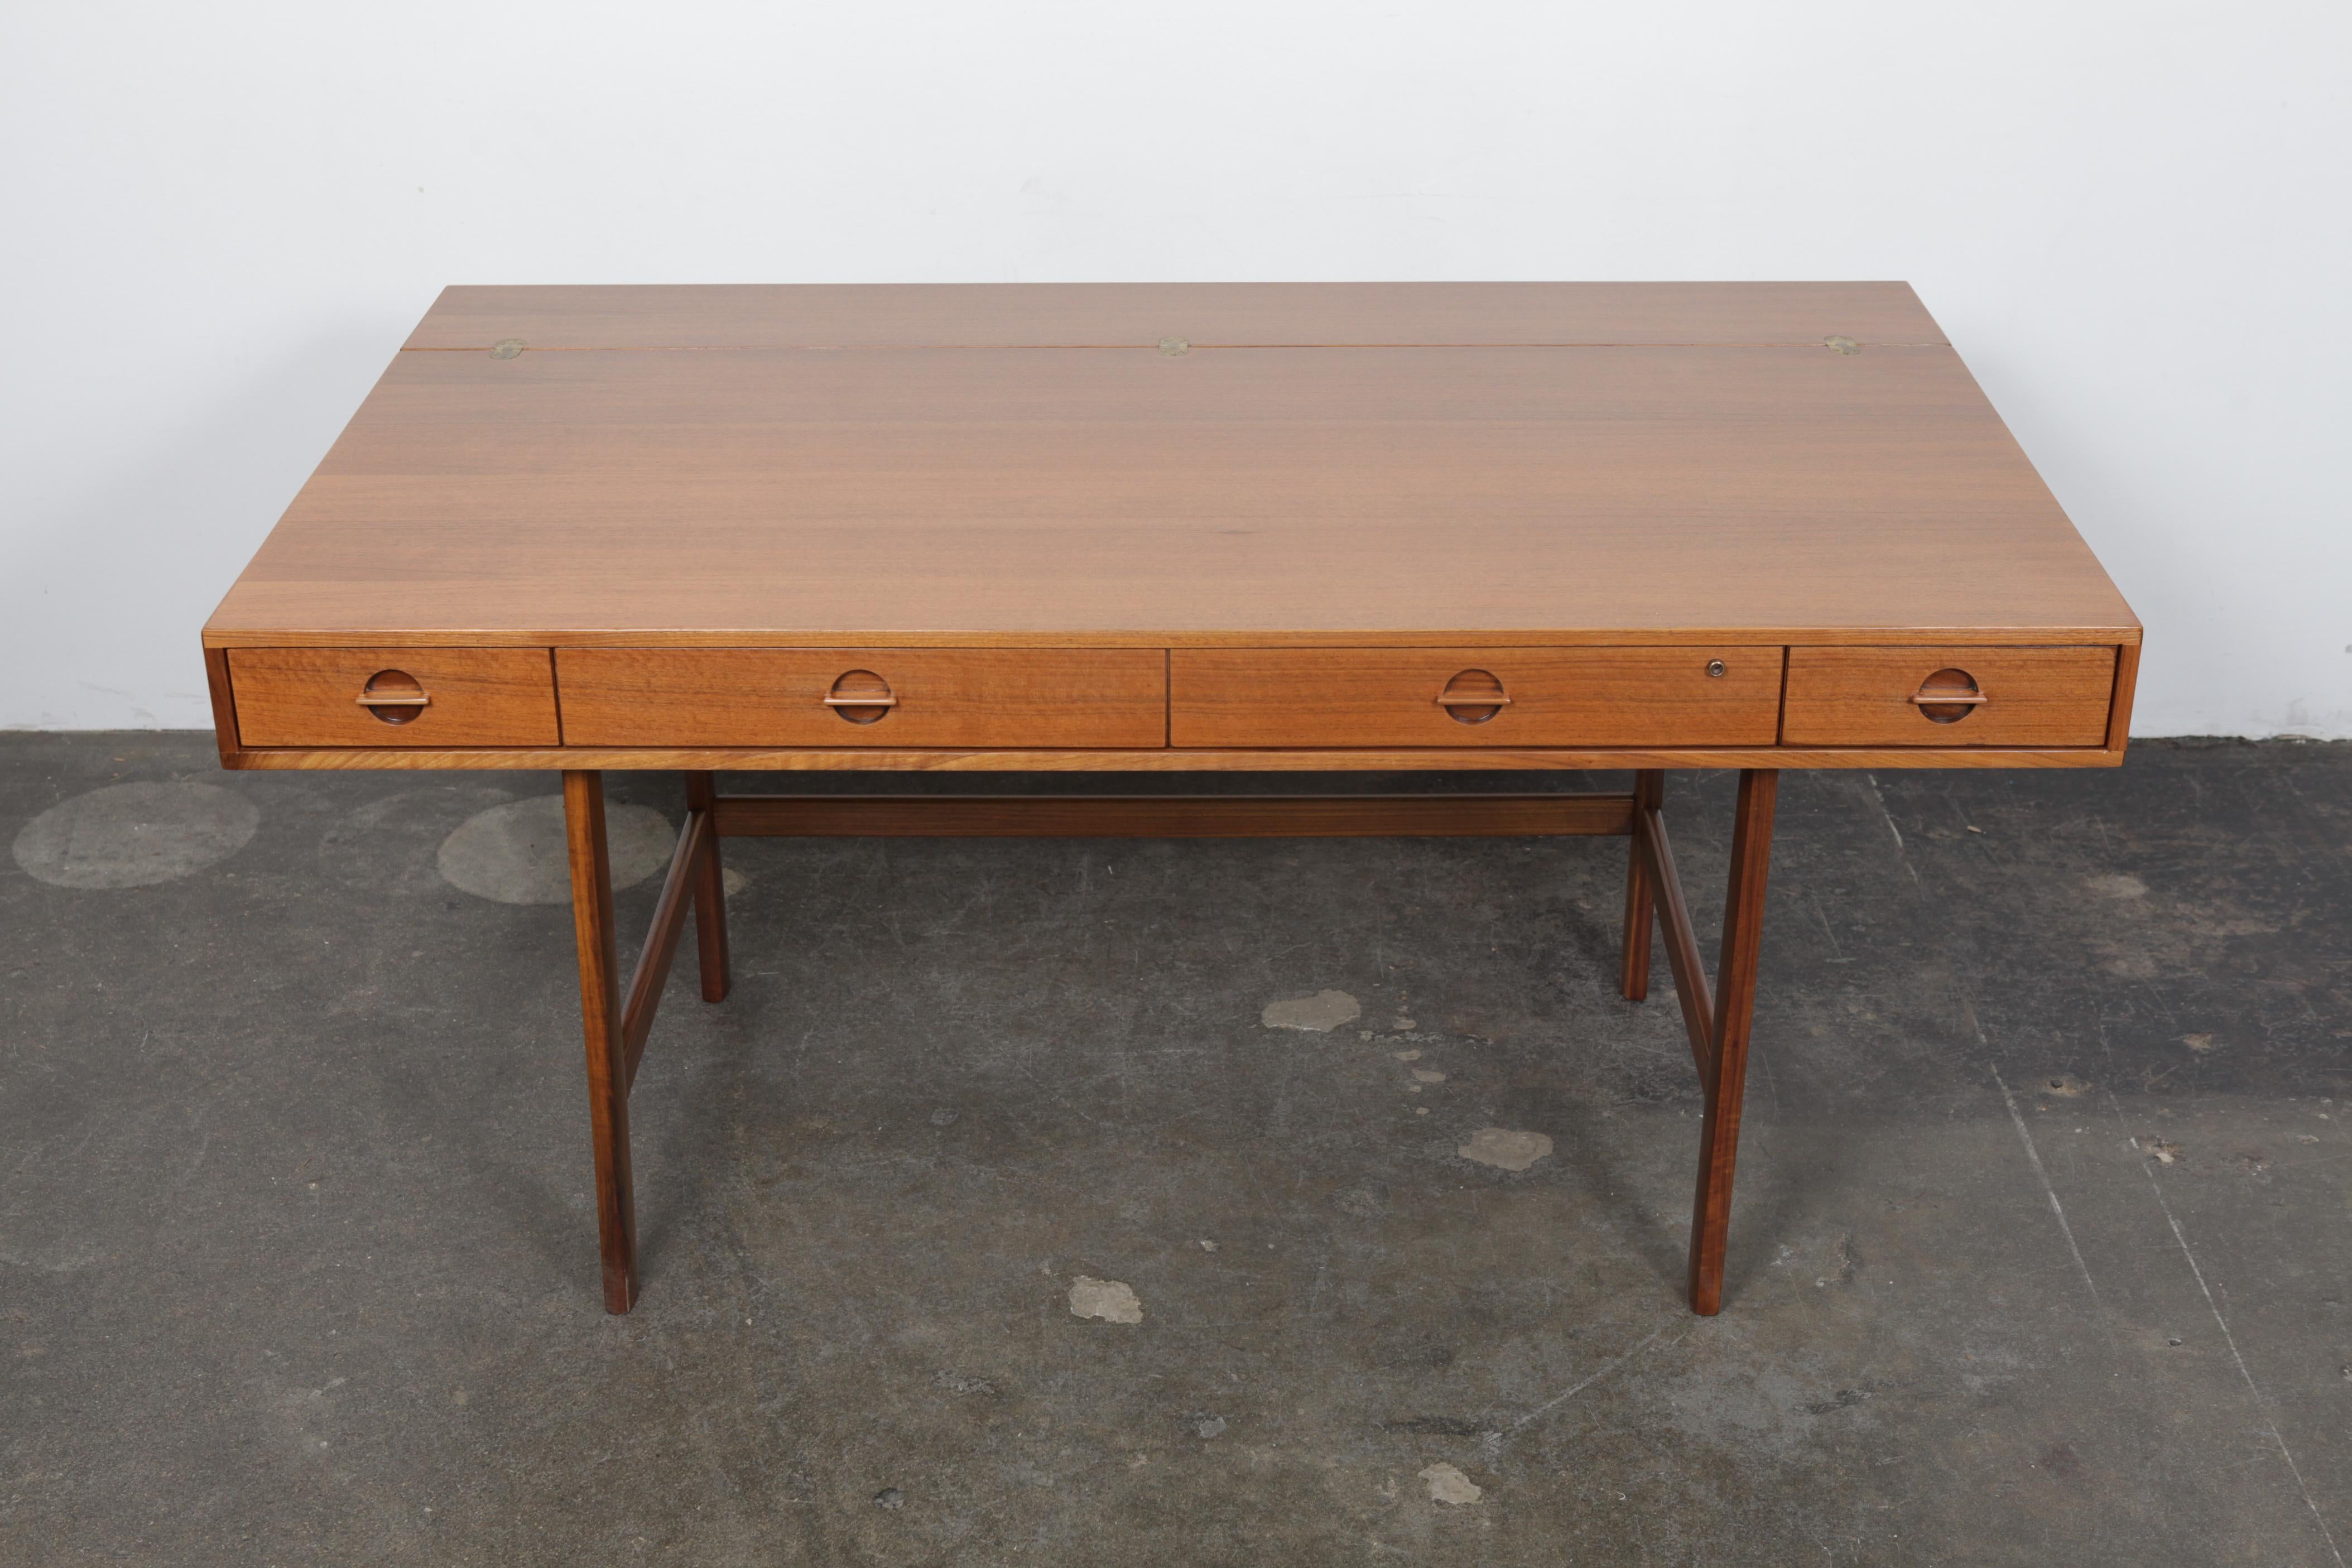 Walnut flip-top desk with ample storage and offering a stunning Silhouette. Newly refinished in a satin lacquer. Designed by Jens Quistgaard for Peter Løvig, Denmark, 1960s. This desk has been fully stripped, sanded and newly refinished in a satin